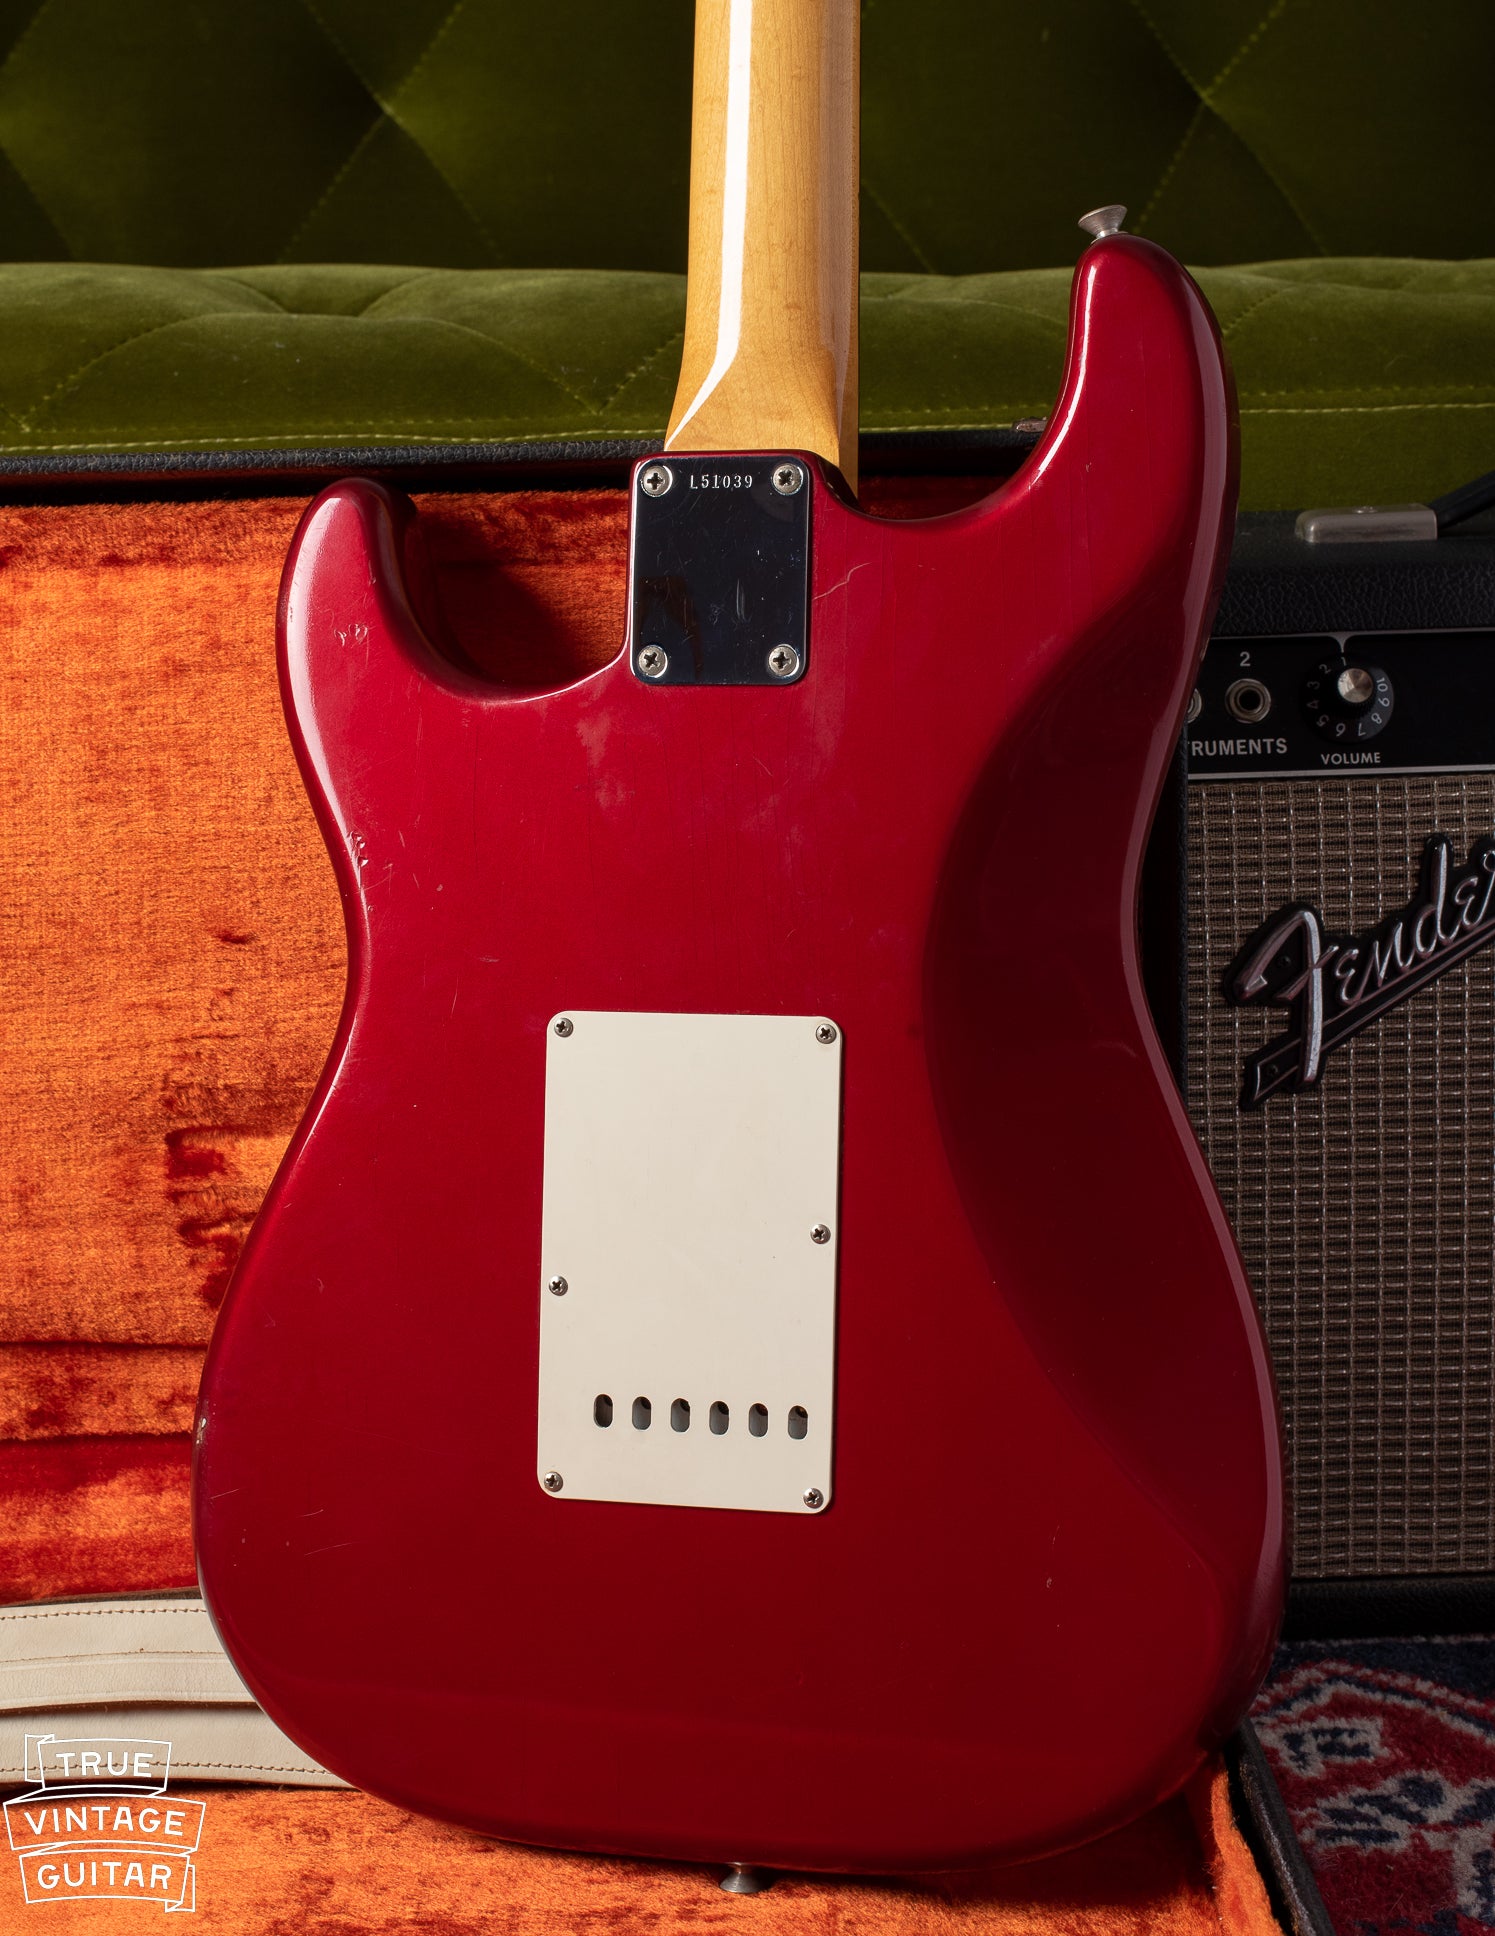 Back of the body of the 1965 Fender Stratocaster with custom color Candy Apple Red finish